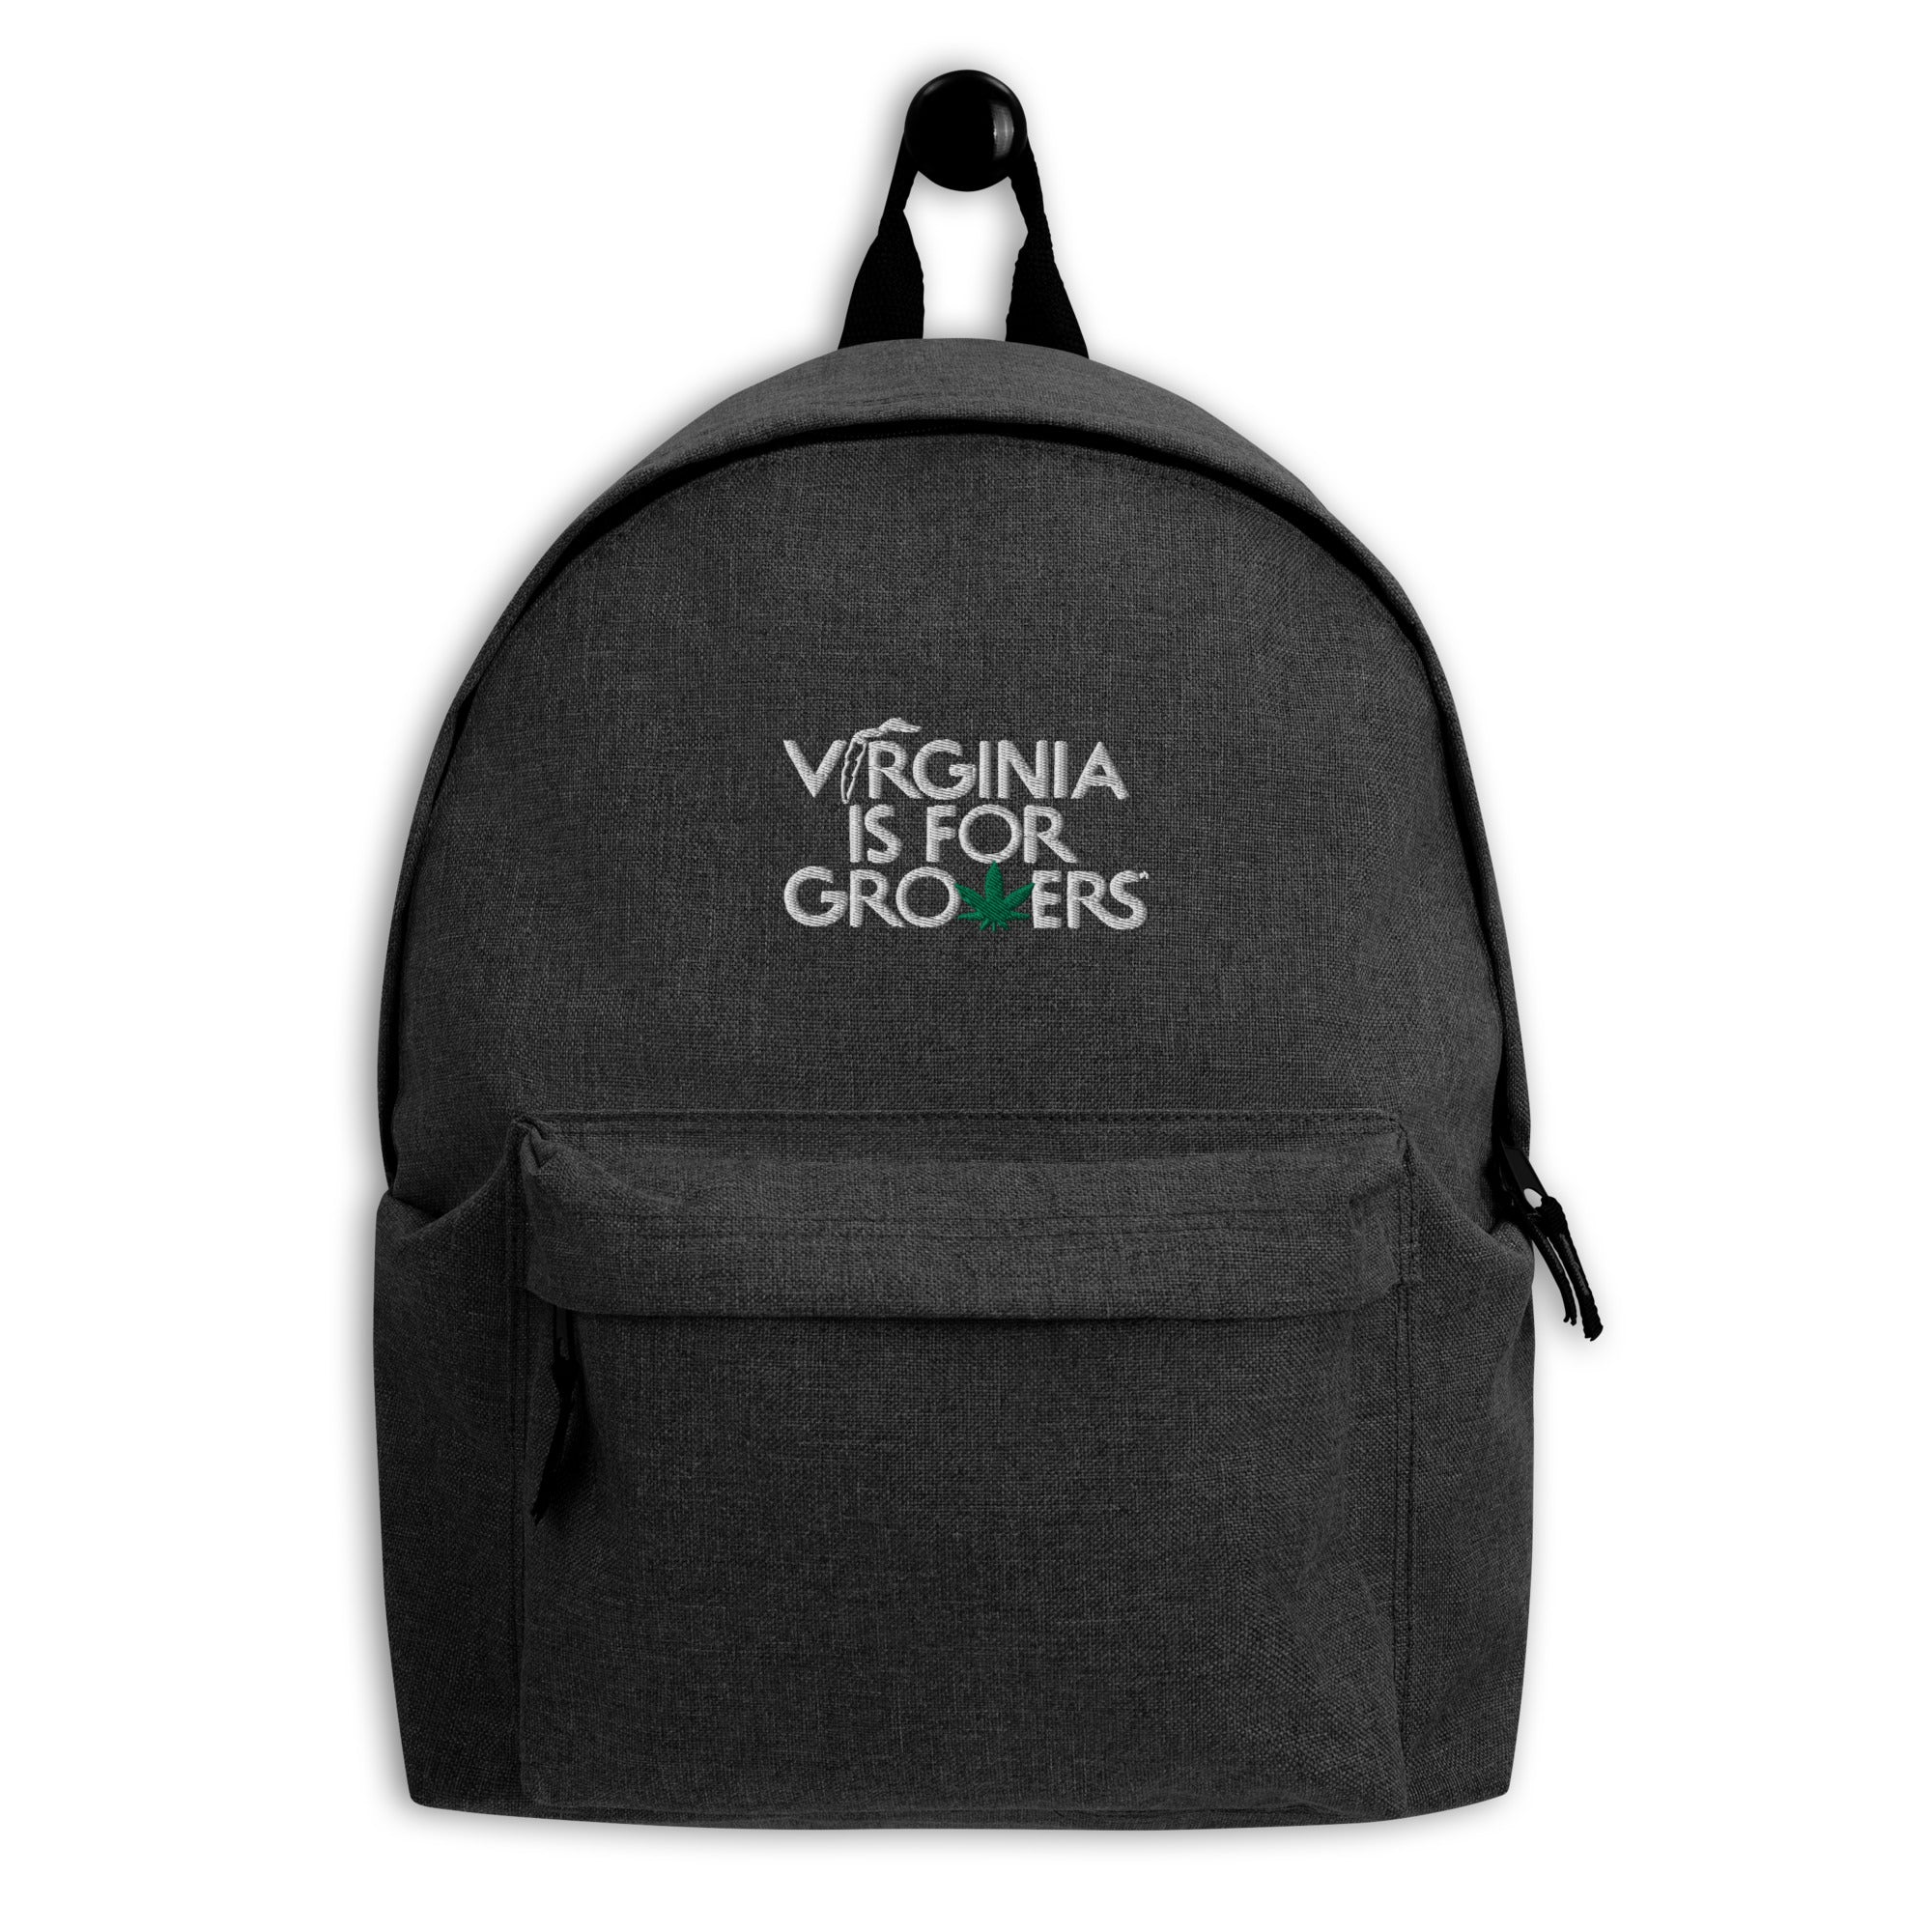 "VA is for Growers" Embroidered Backpack